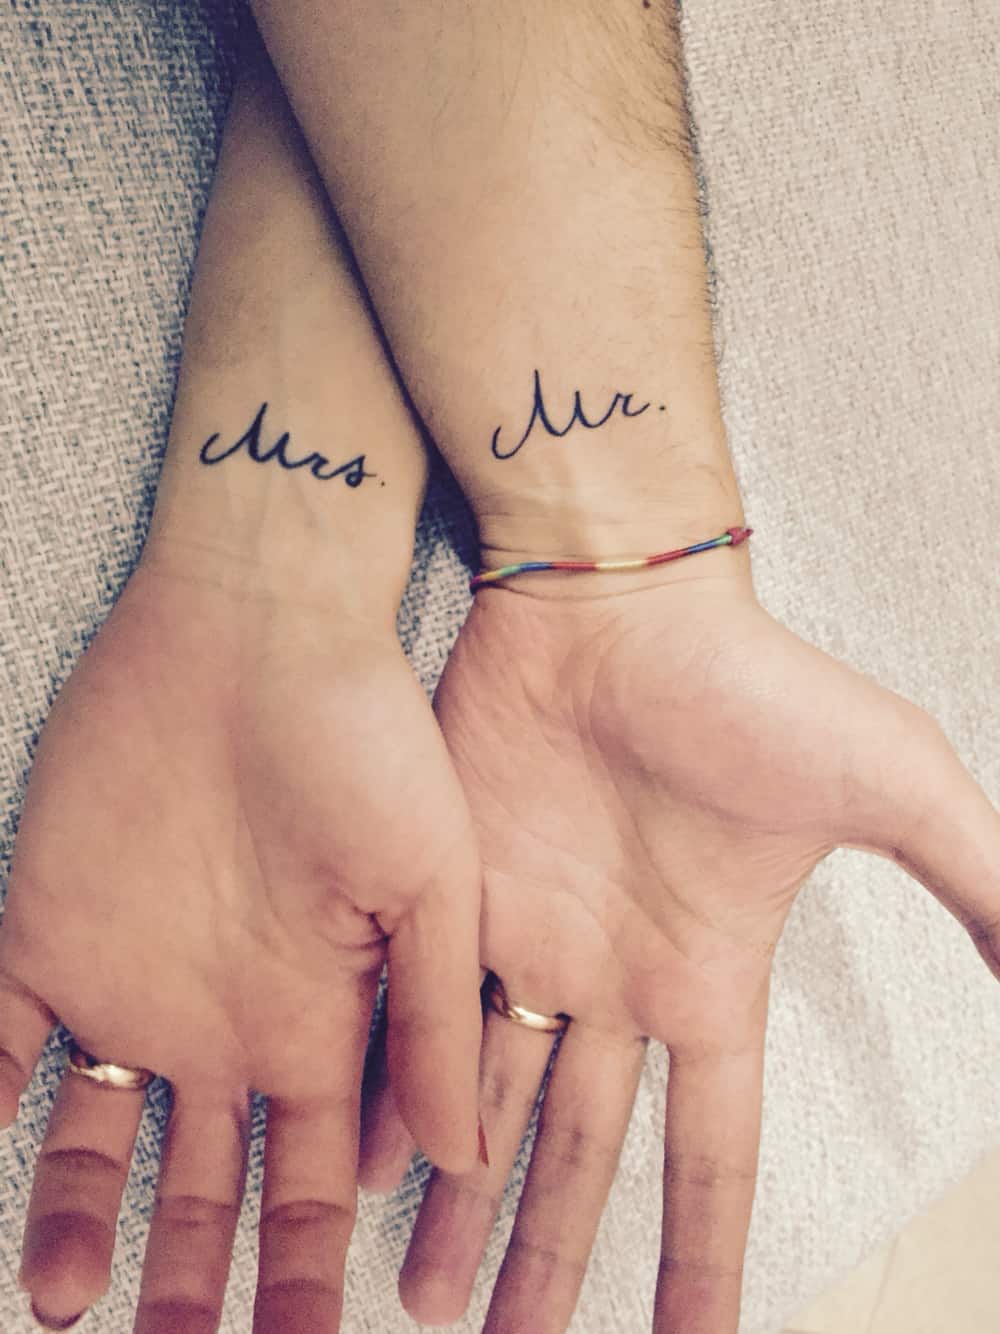 42 Wedding Ring Tattoos That Will Only Appeal To The Most Amazing Of  Couples  TattooBlend